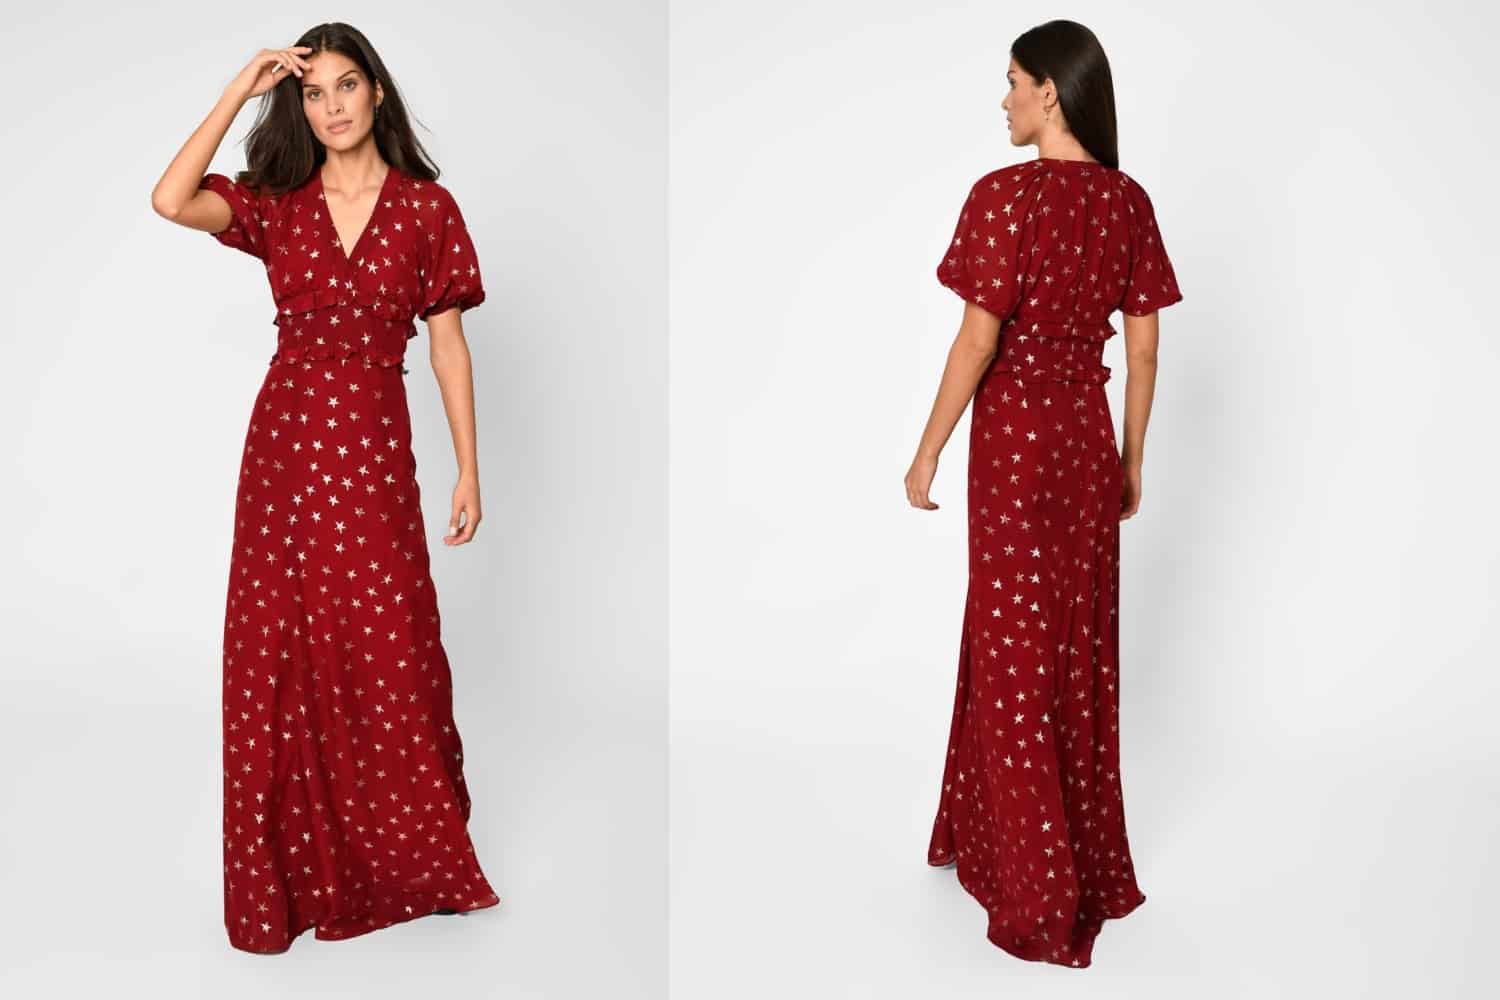 Editor's Pick: Nicole Miller Star Lurex Maxi Dress - Daily Front Row